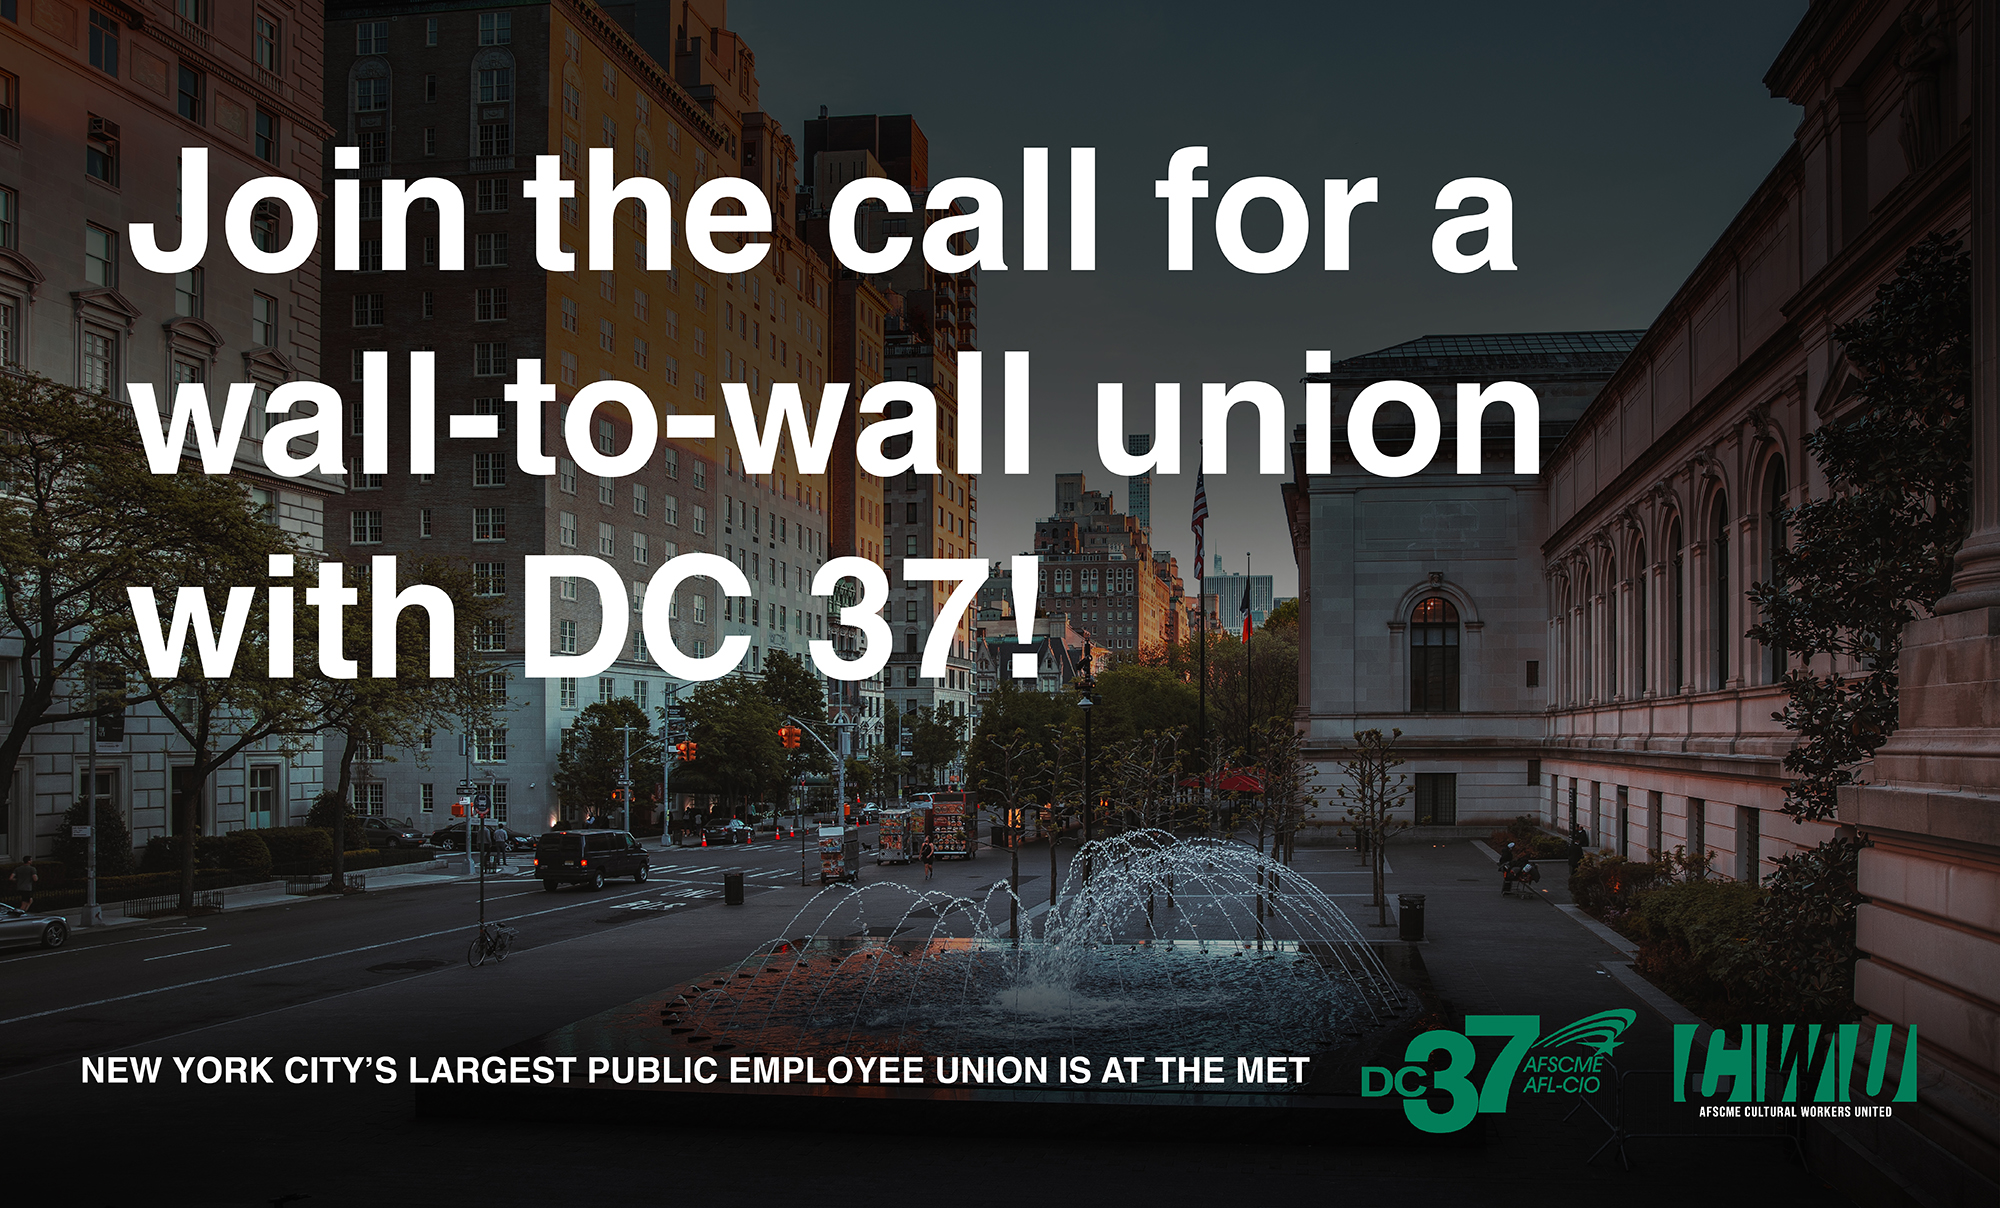 Join the call for a wall-to-wall union with DC 37!